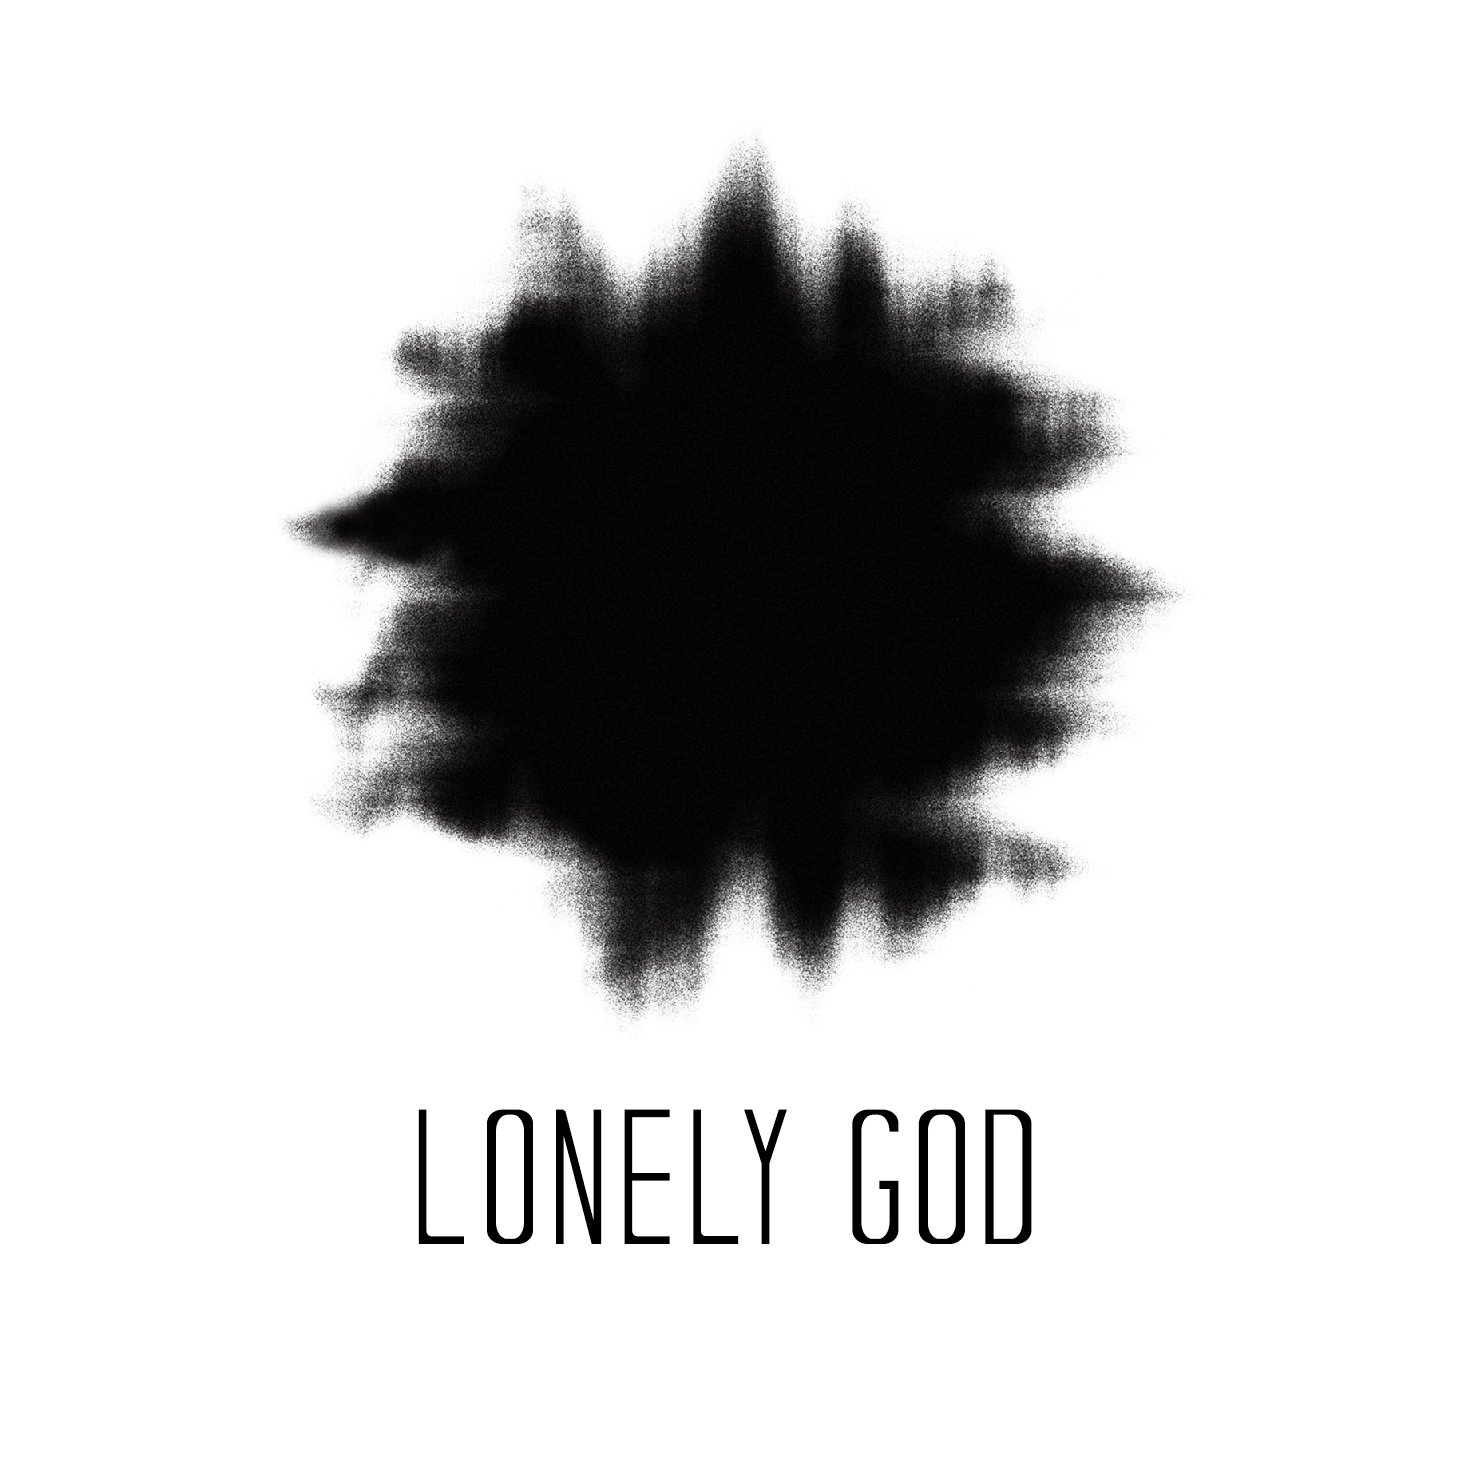 LONELY GOD